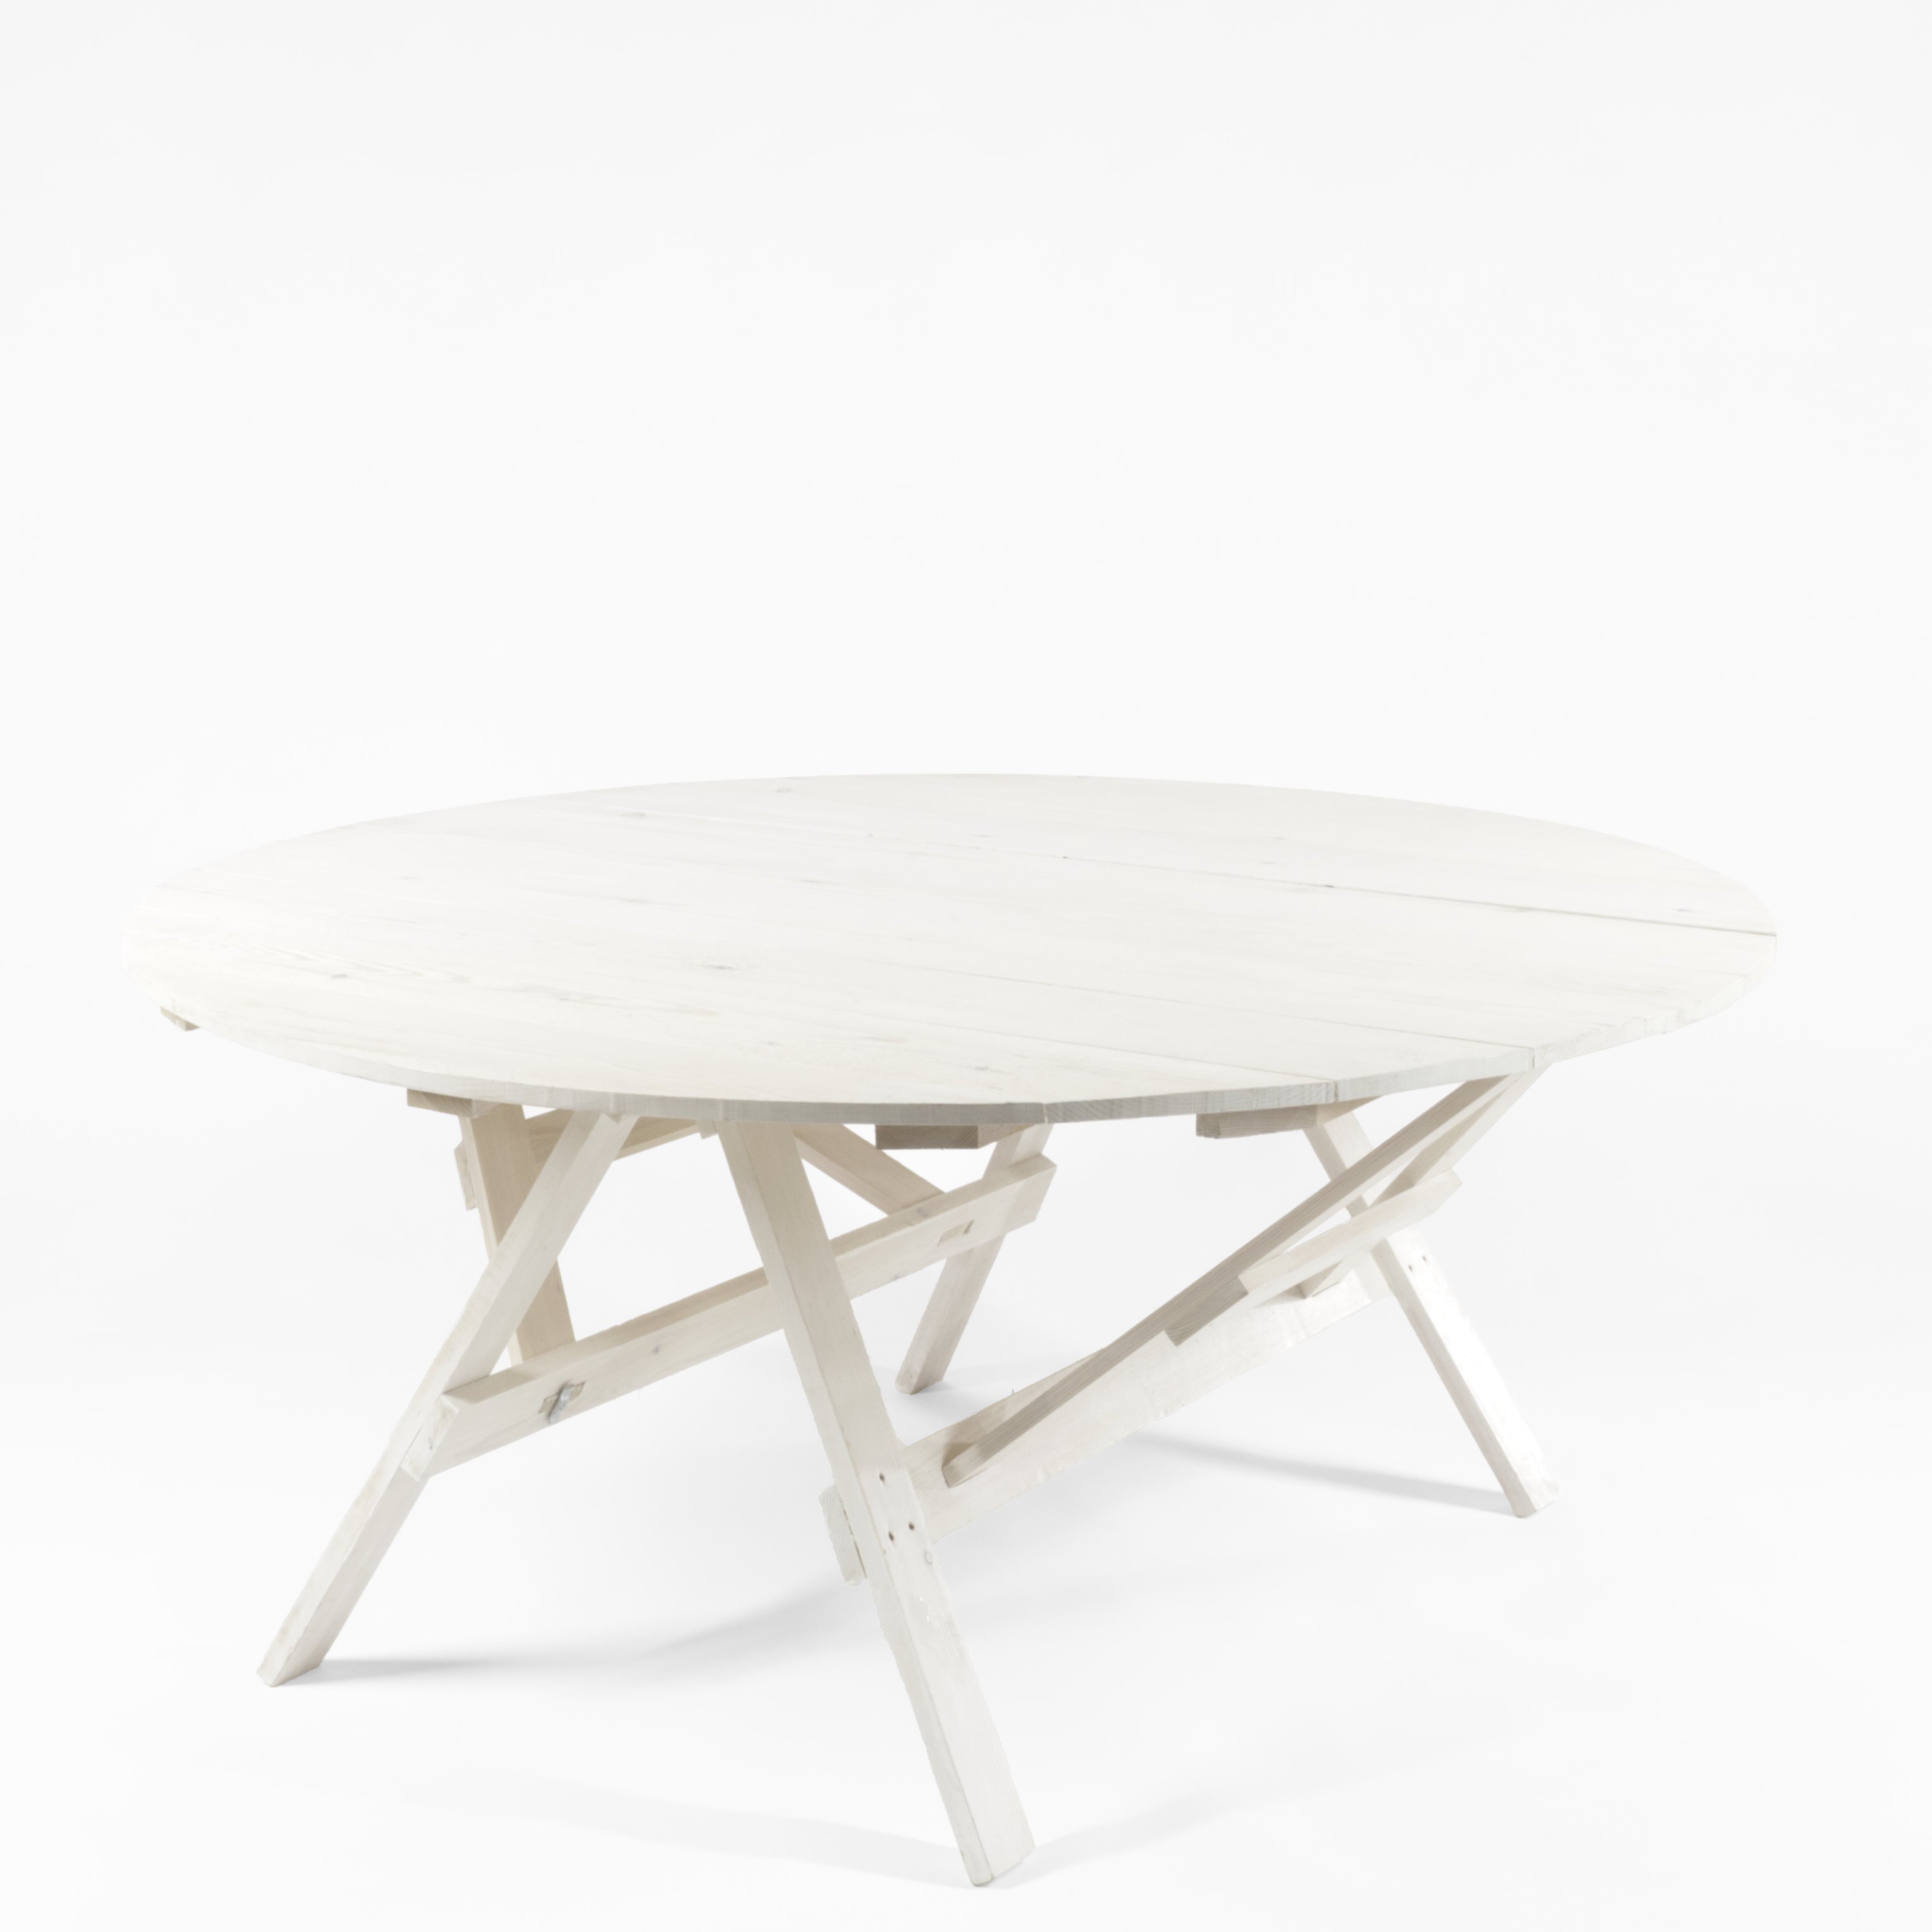 White Timber Rounb Table3